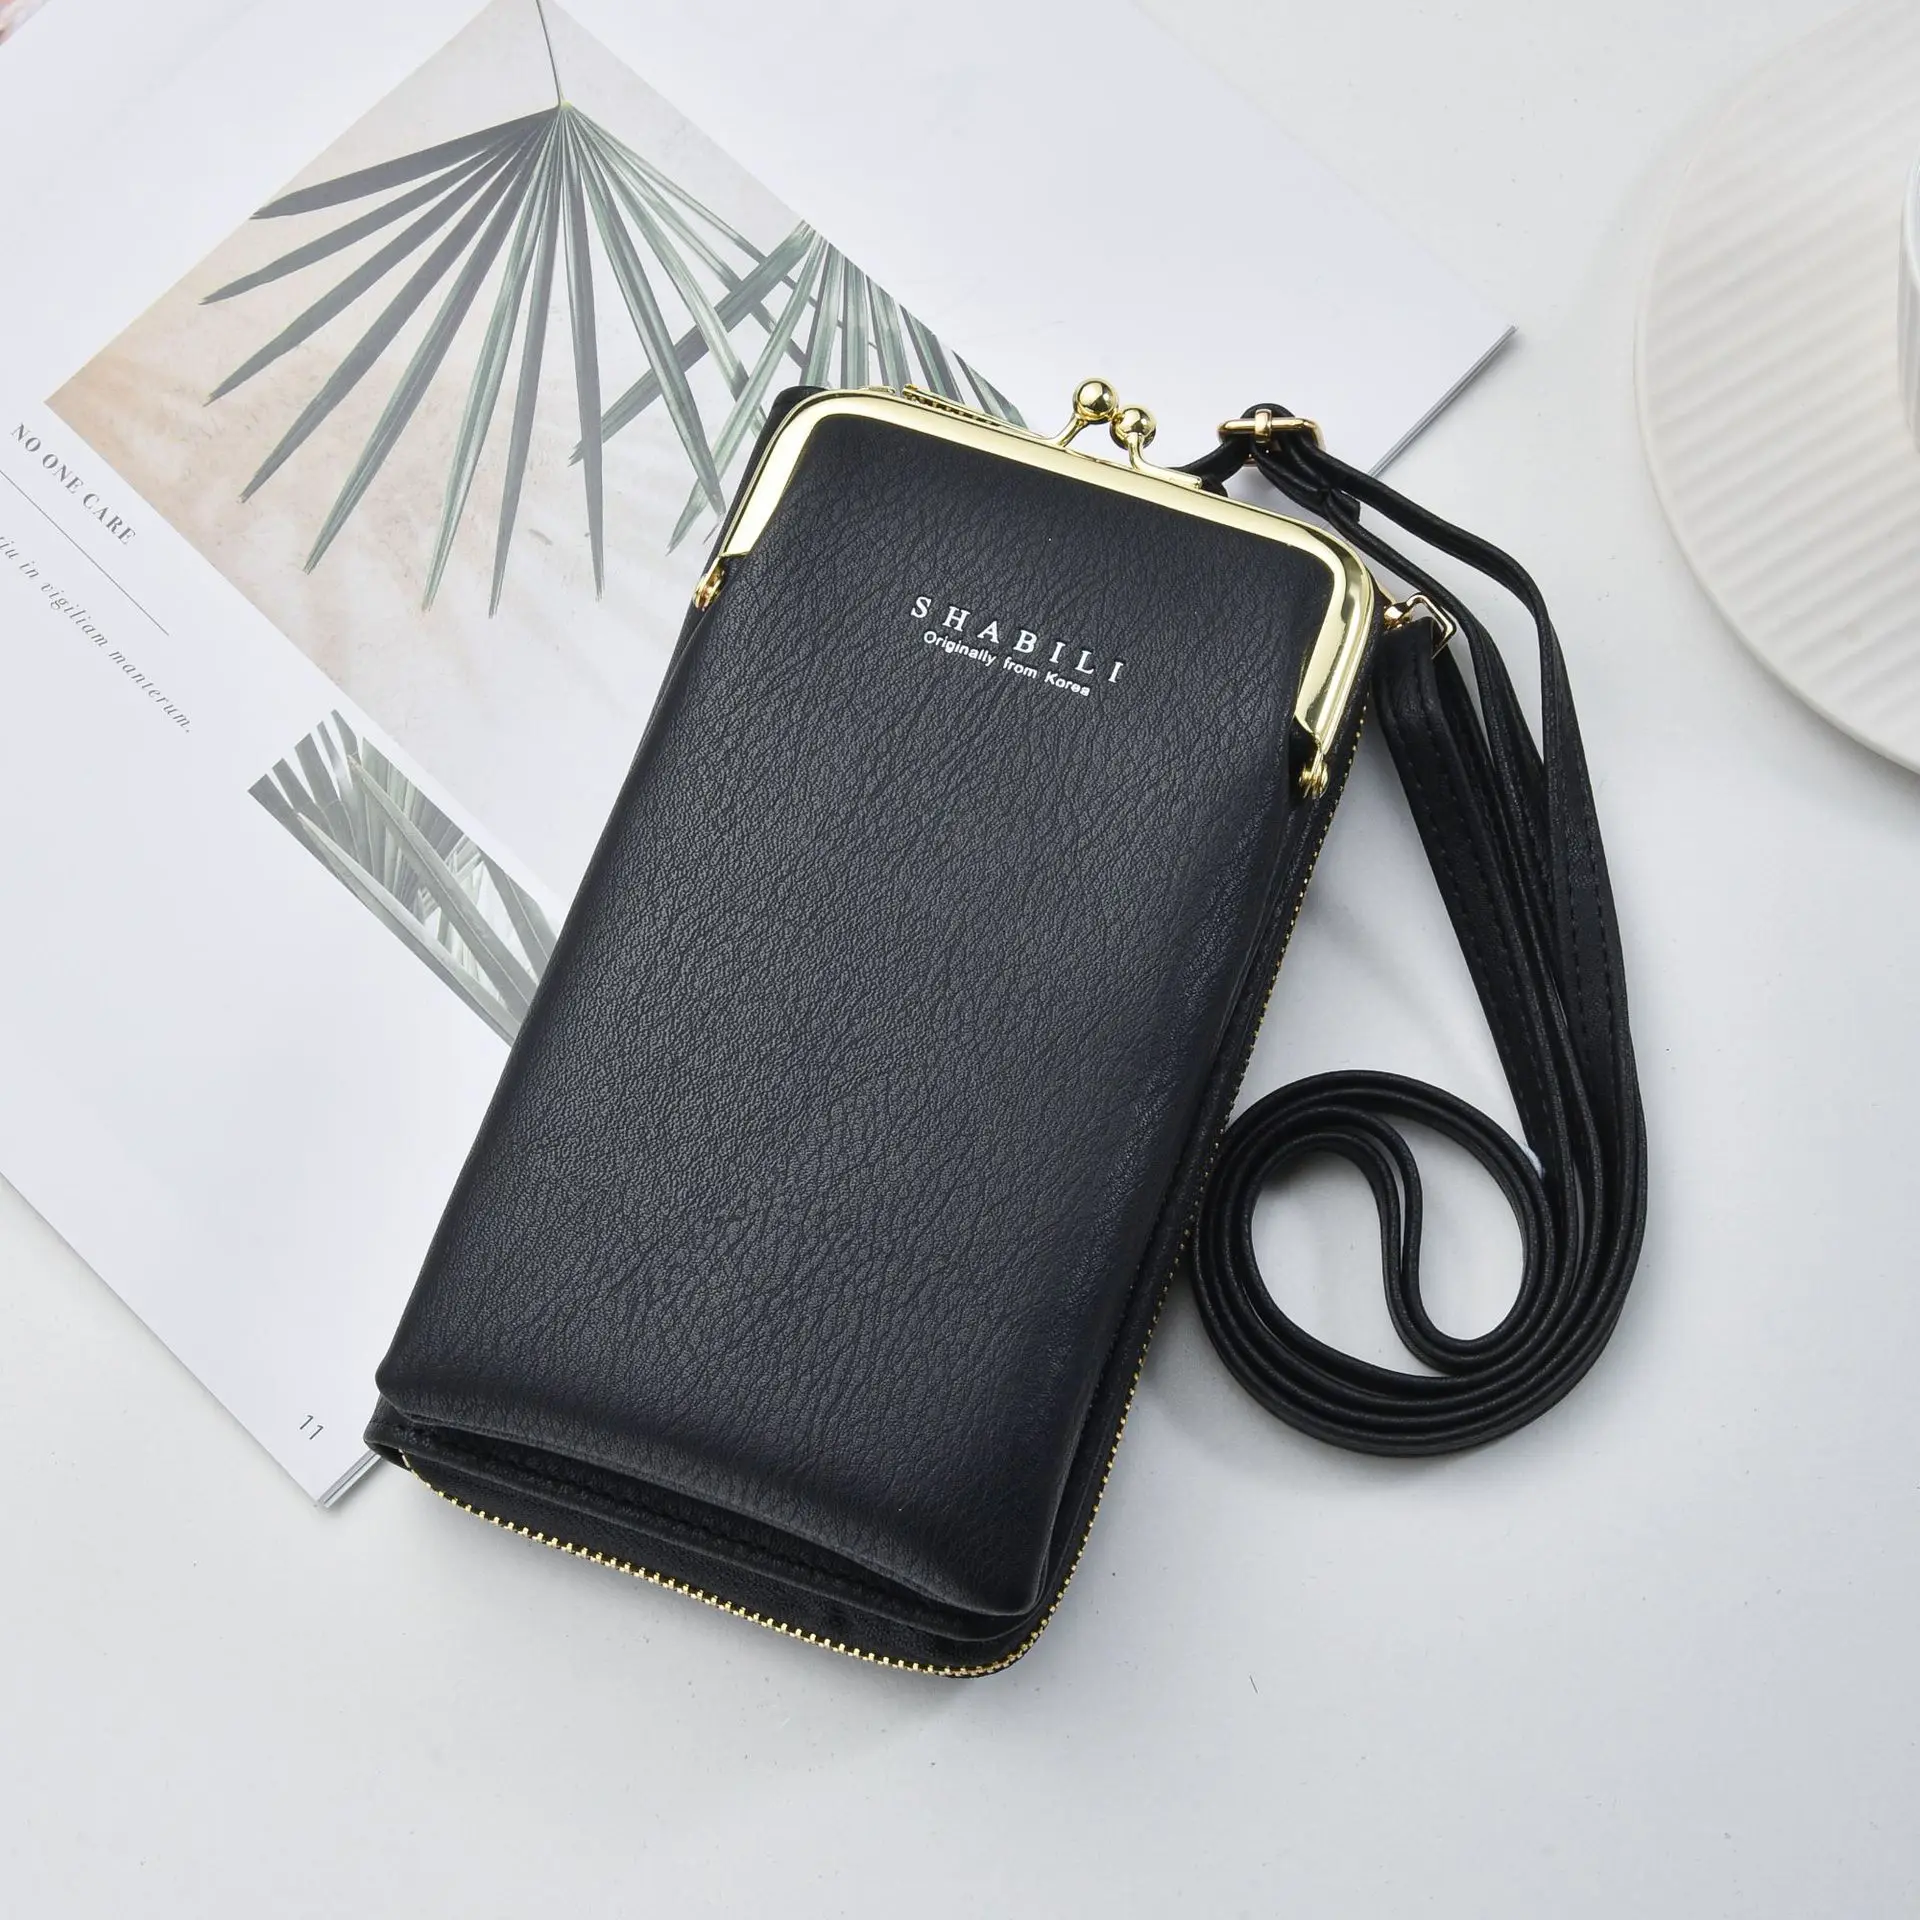 Fashion Women's Bag Mini Leather Wallets Card Holder Cell Phone Purse New Mobile Phone Crossbody Bags Female Shoulder Bag